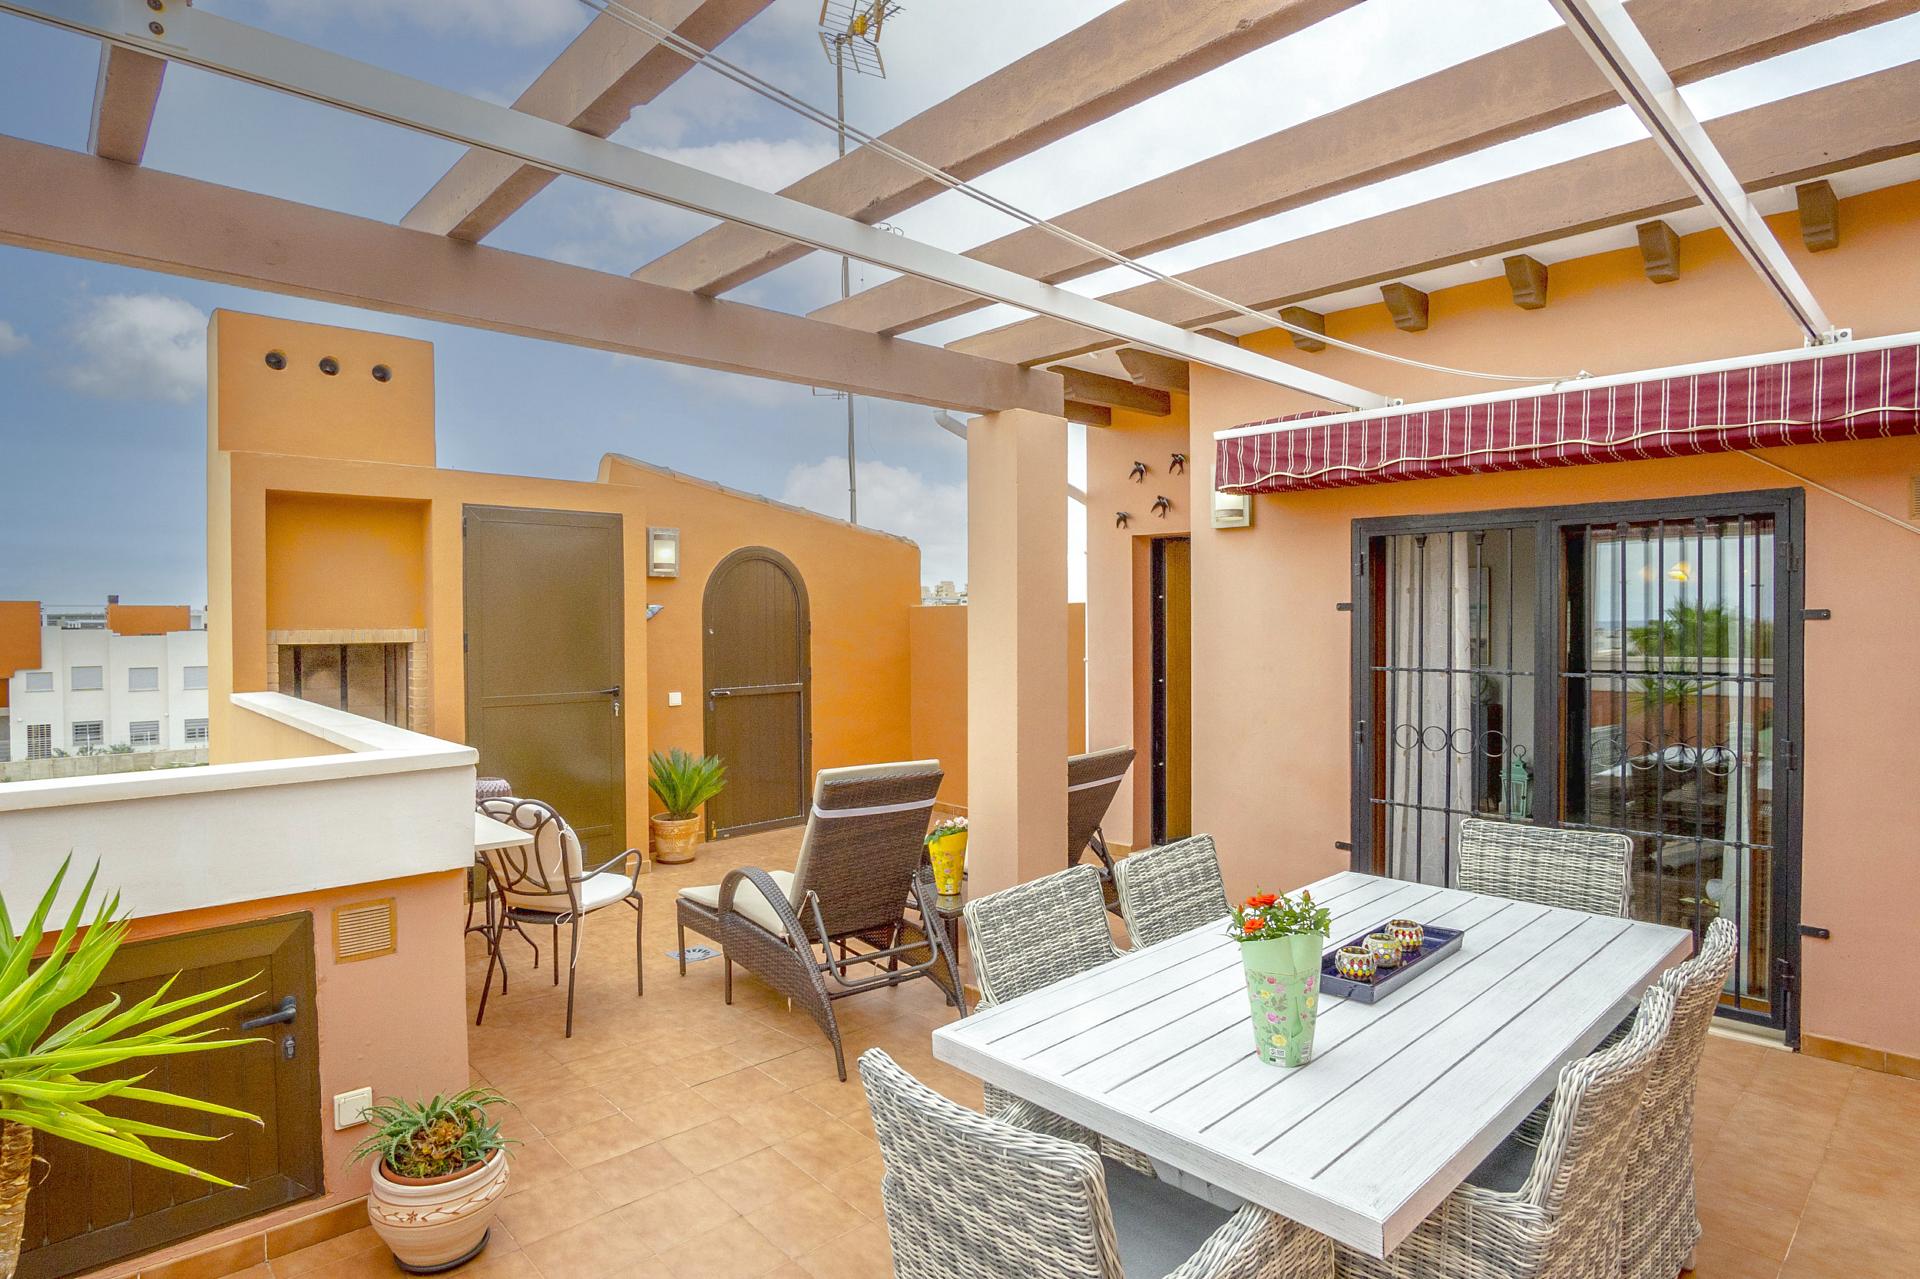 SOLD! Mediterranean penthouse for sale in Res. Altos del Sol in one of the best residential areas of Torrevieja.